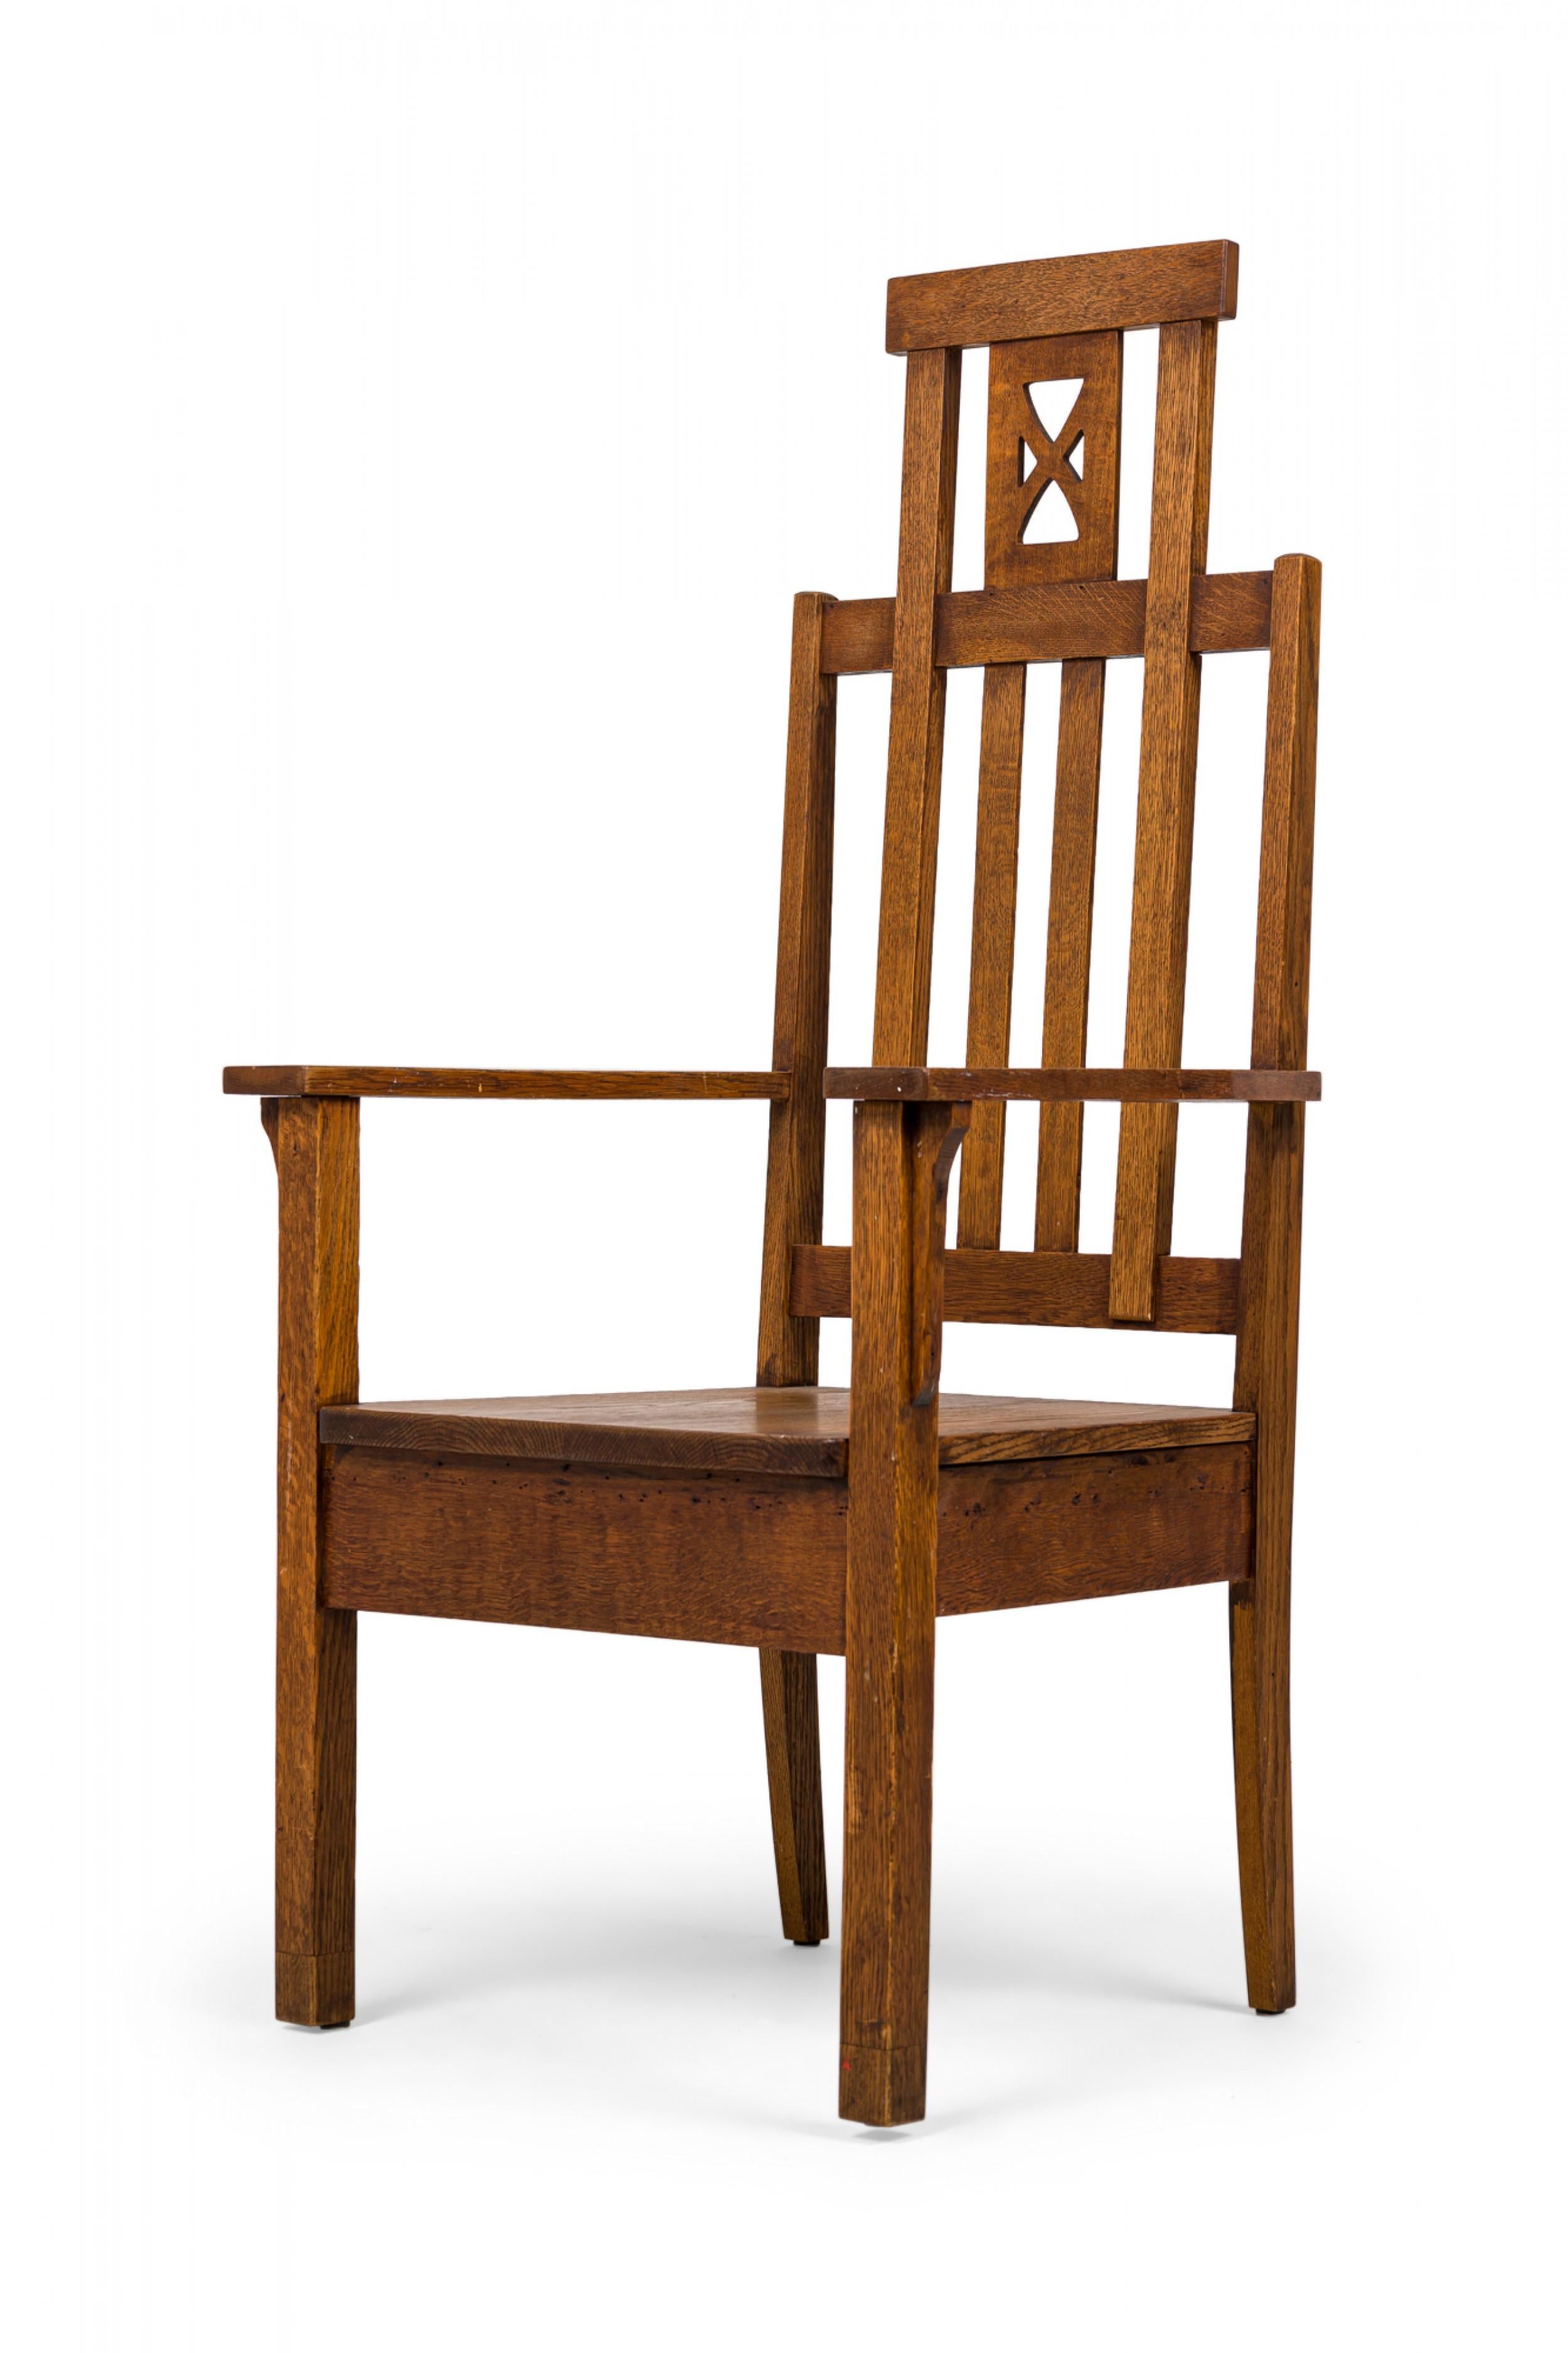 American Mission high back oak armchair with a slat back topped with an extended headrest featuring an x-design interior, resting on four square legs.